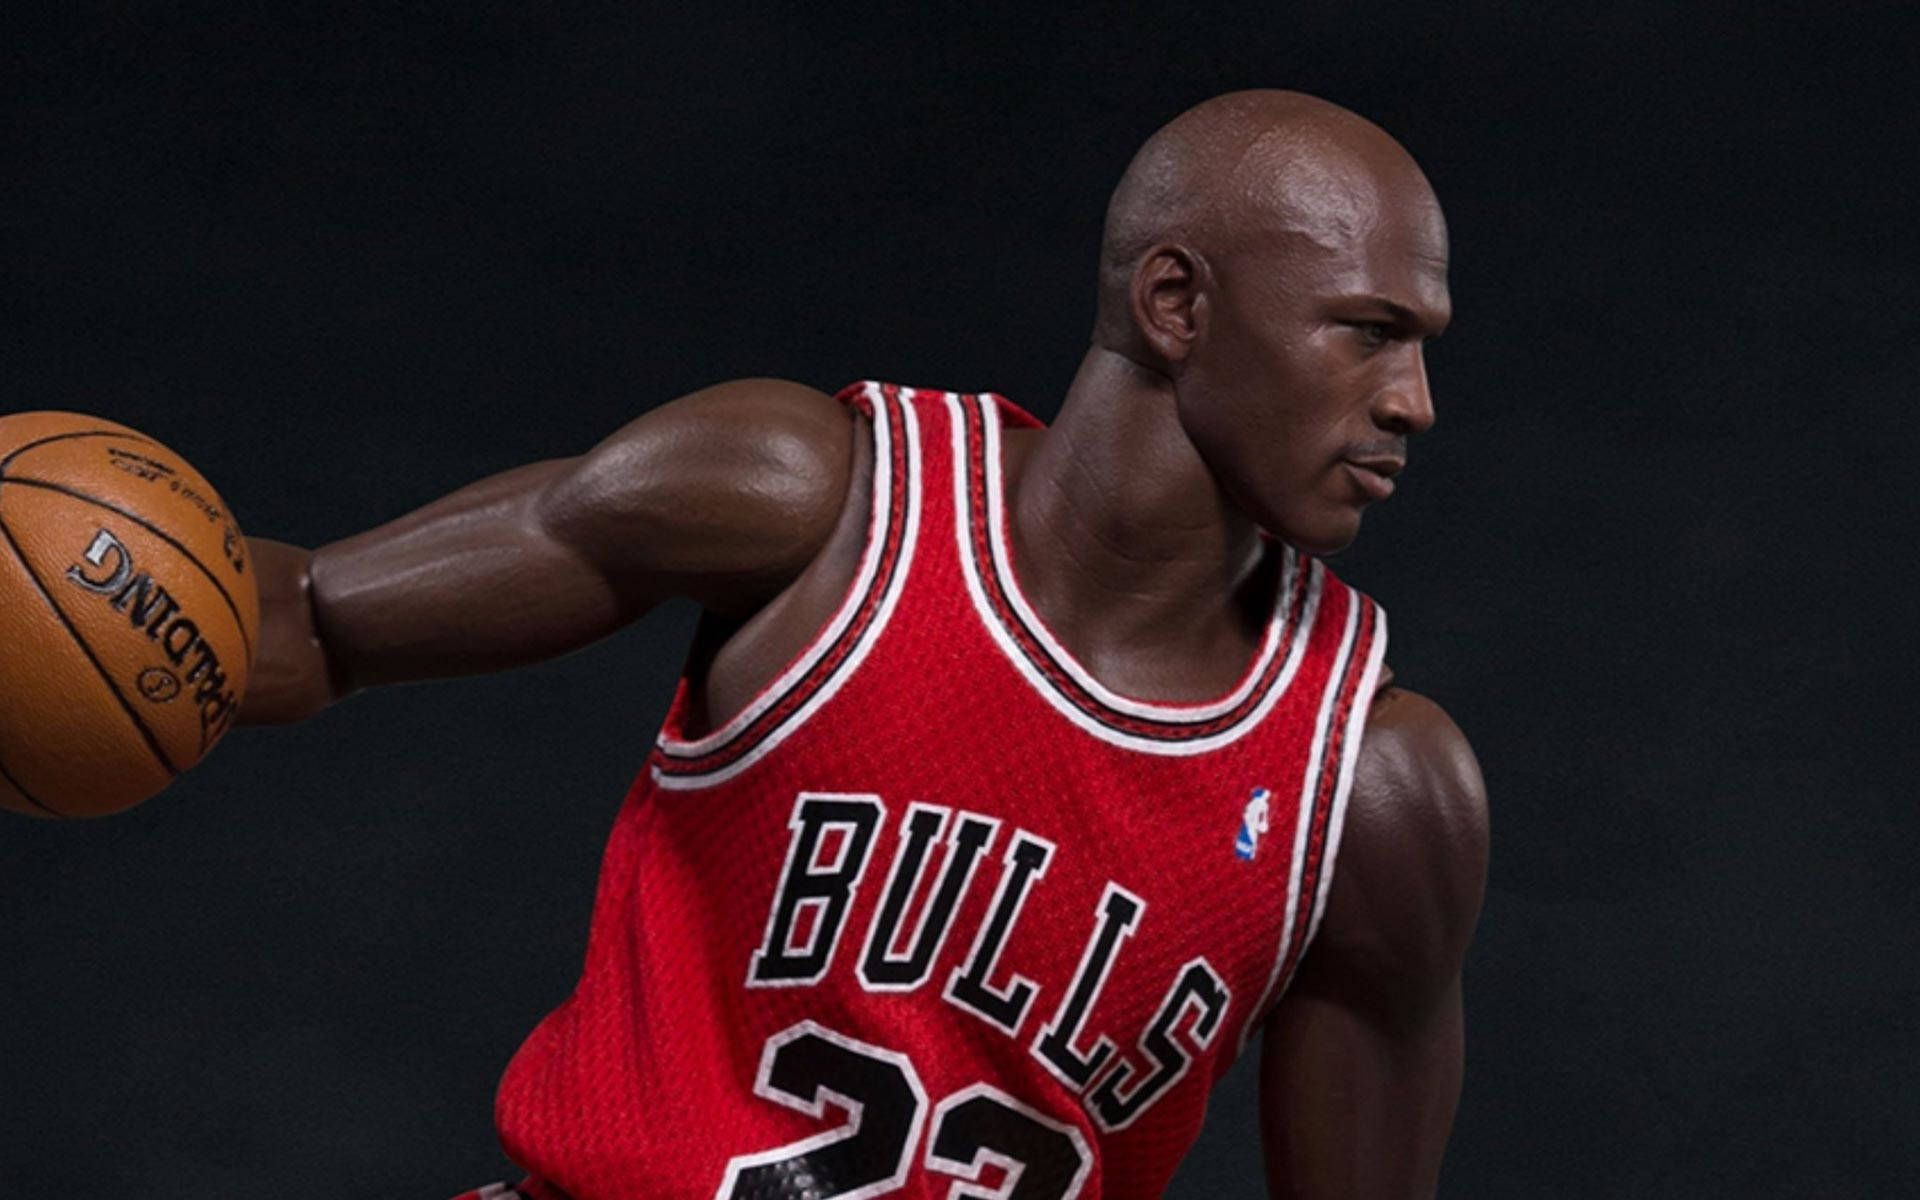 This is the 23rd Michael Jordan action figure, created by Enterbay. - Michael Jordan, Air Jordan